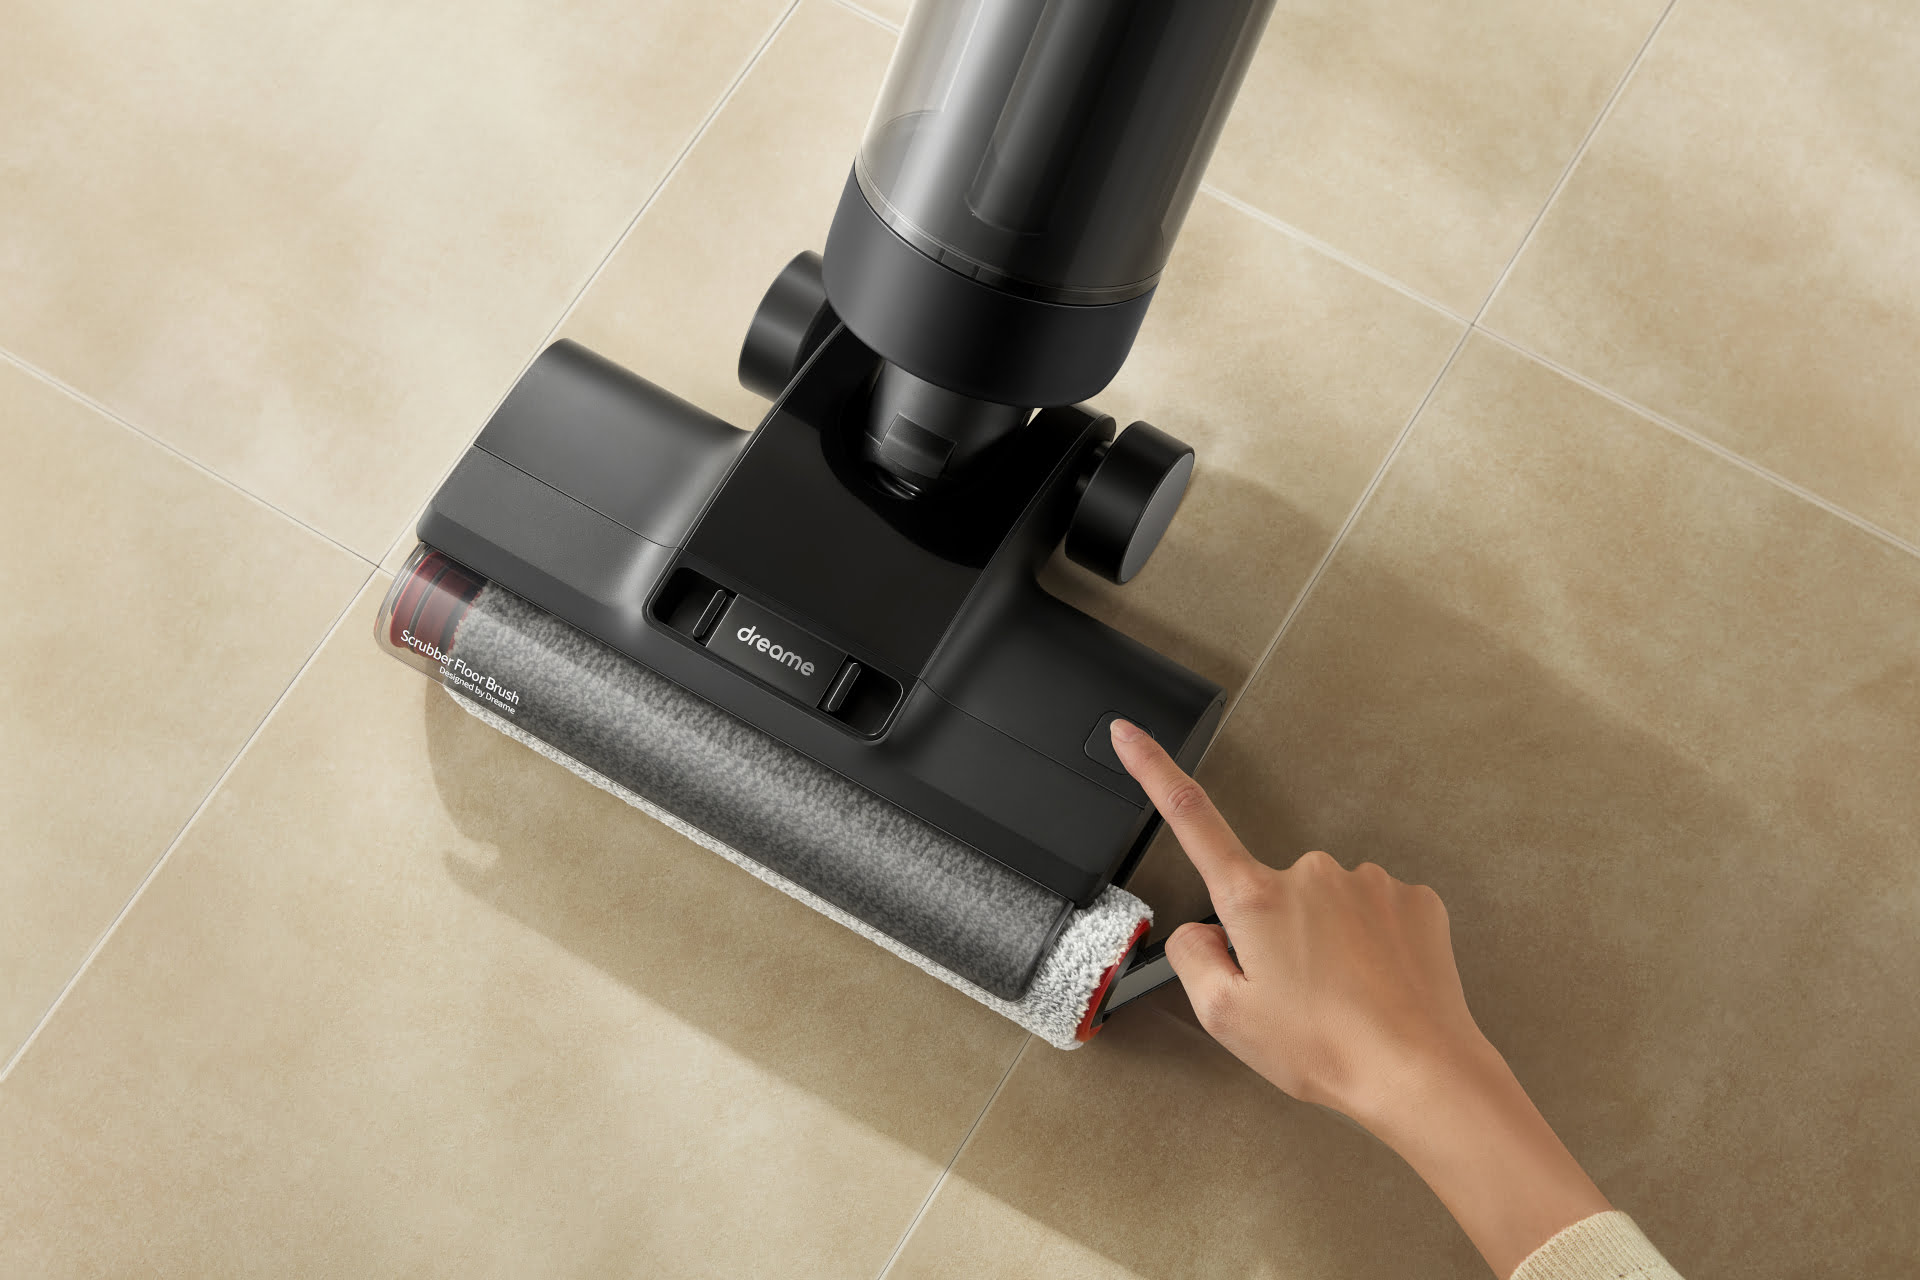 Dreame H12 Dual  A Powerful 4-in-1 Cleaning Wizard 